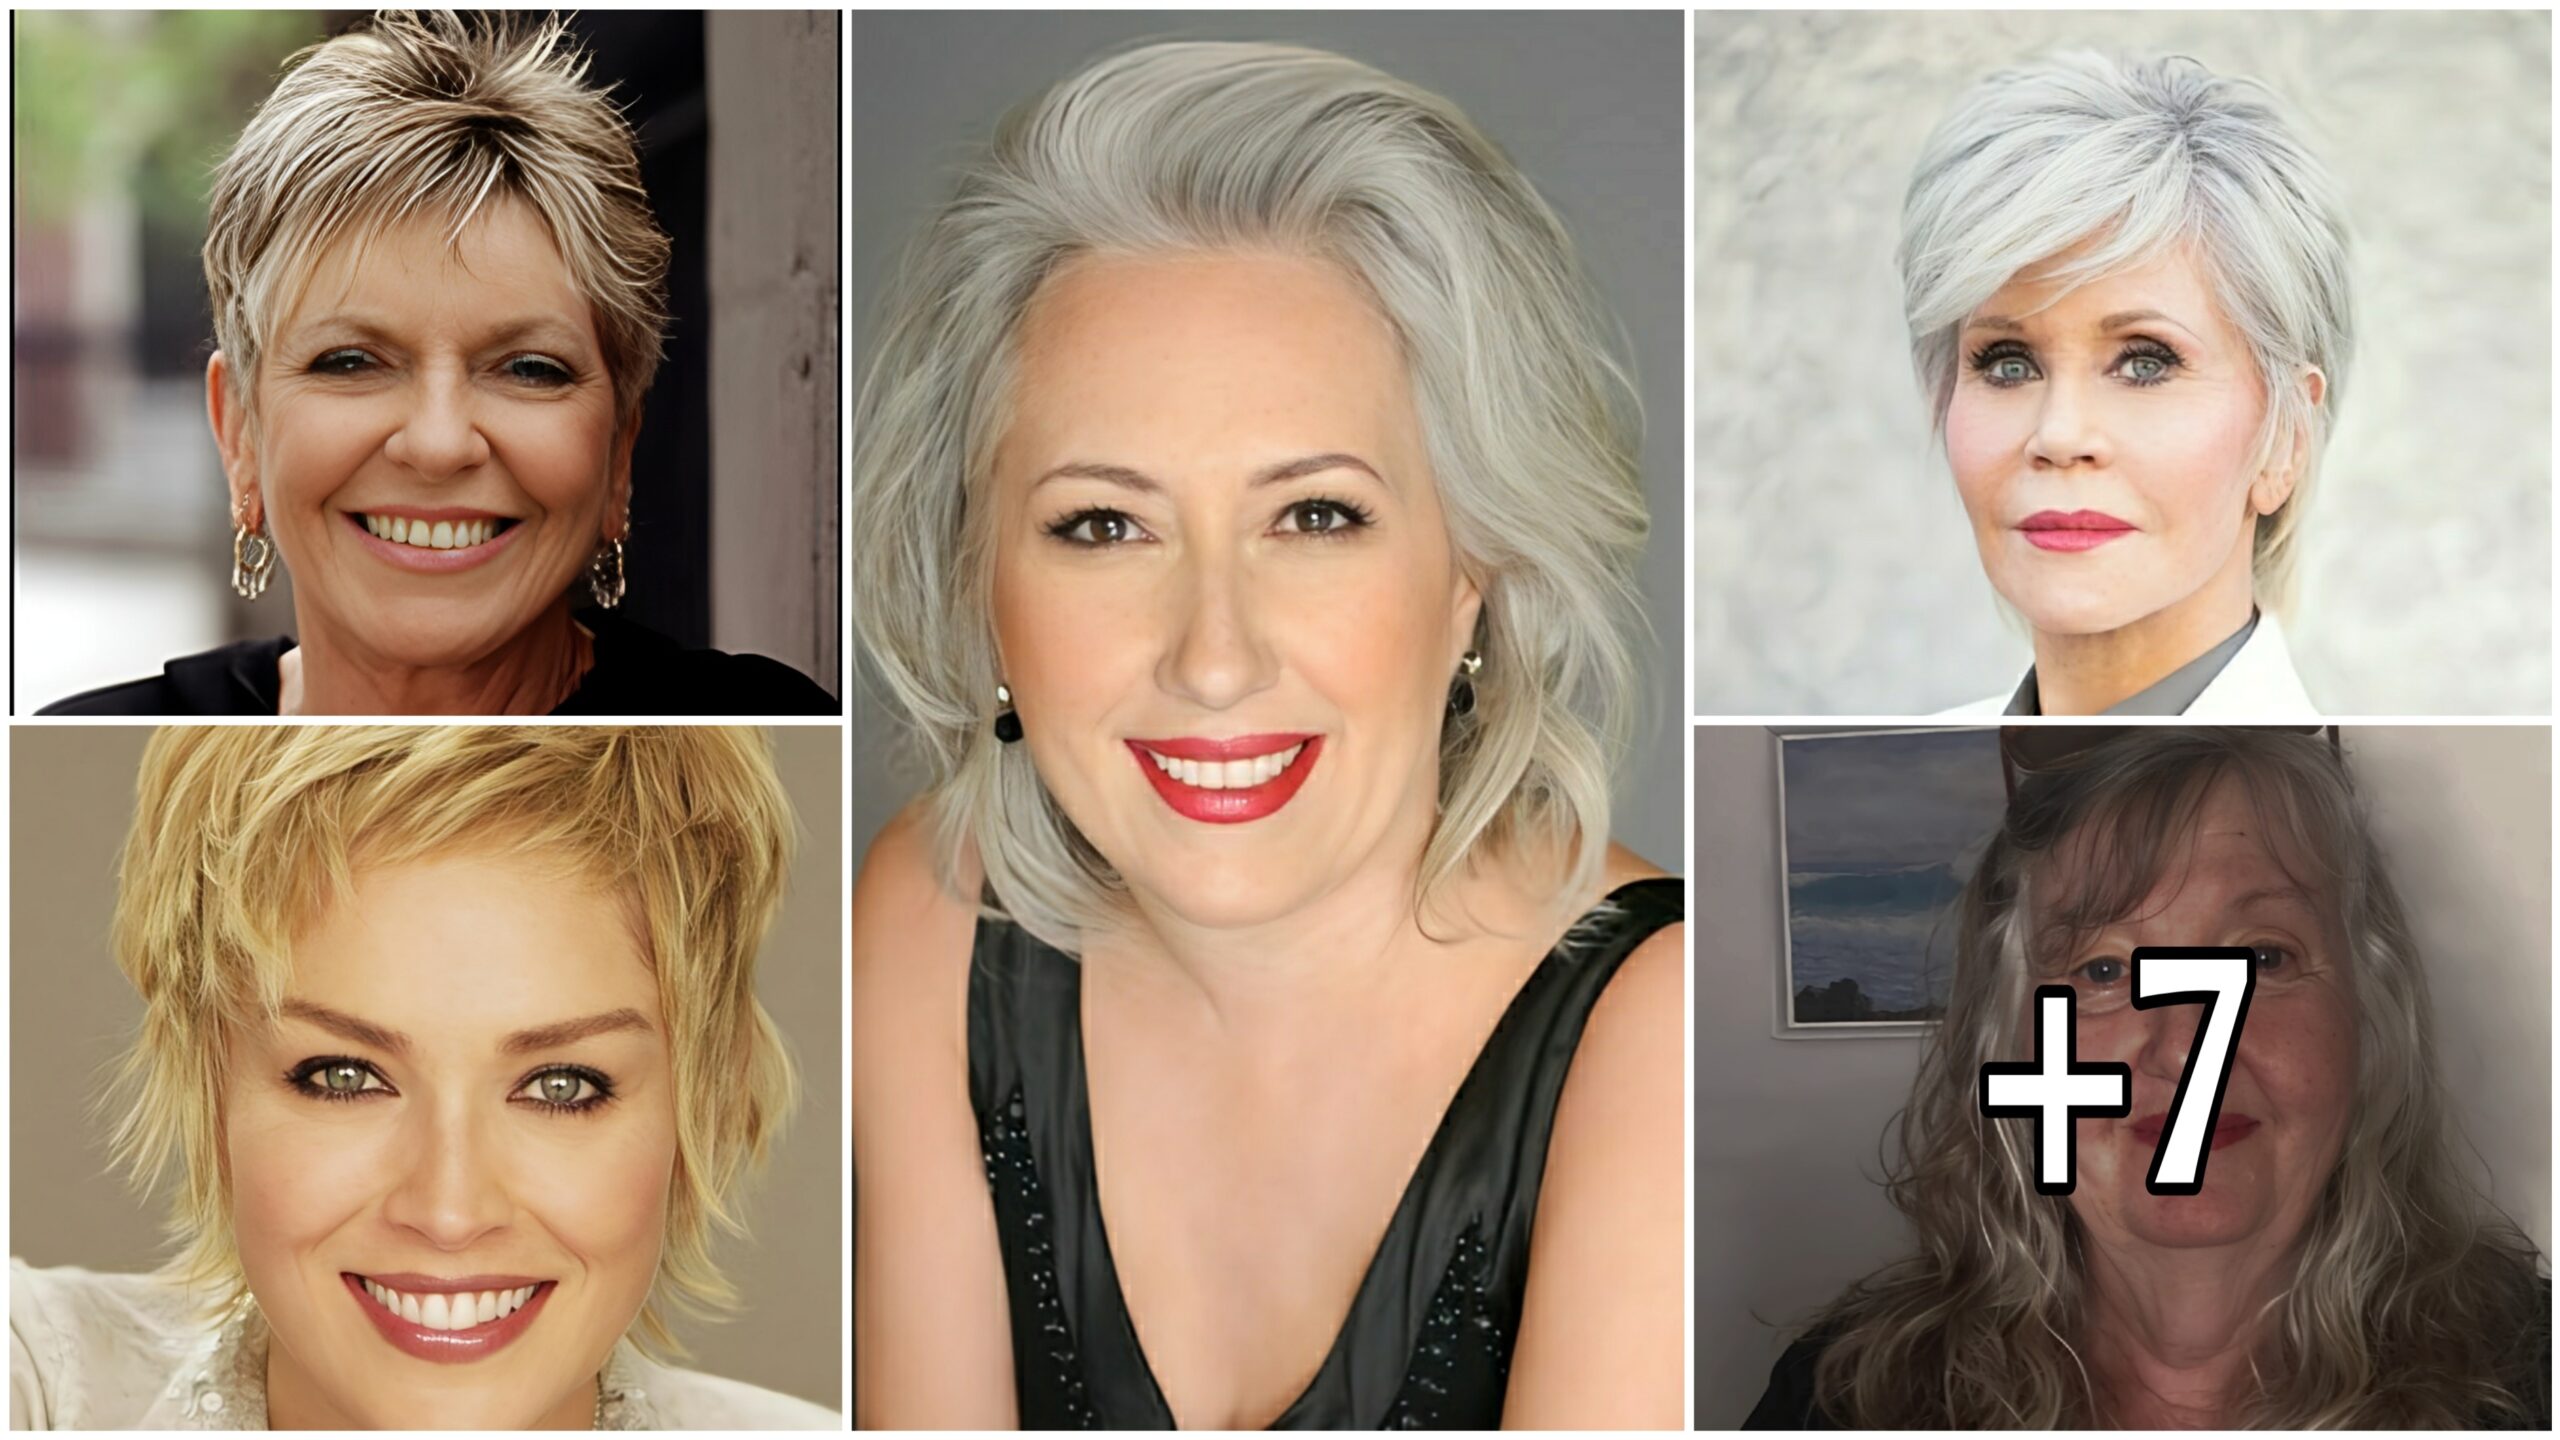 +10 Stylish Hairstyles for Women Over 50: Age with Elegance